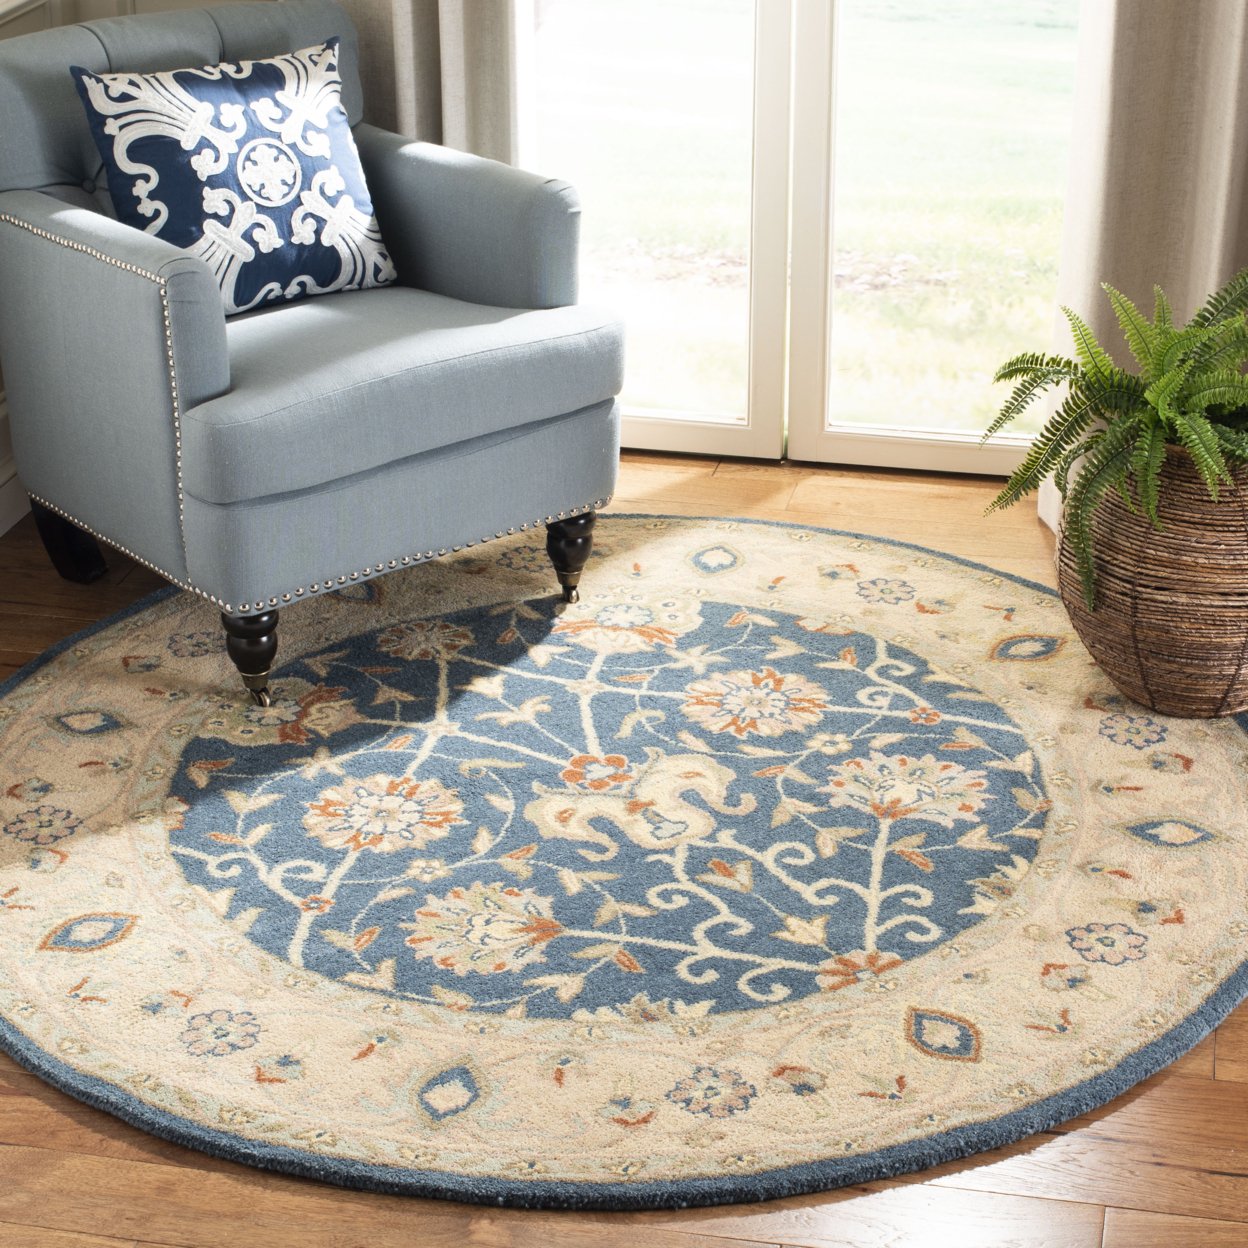 SAFAVIEH Antiquity Collection AT21E Handmade Blue Rug - 8' Round